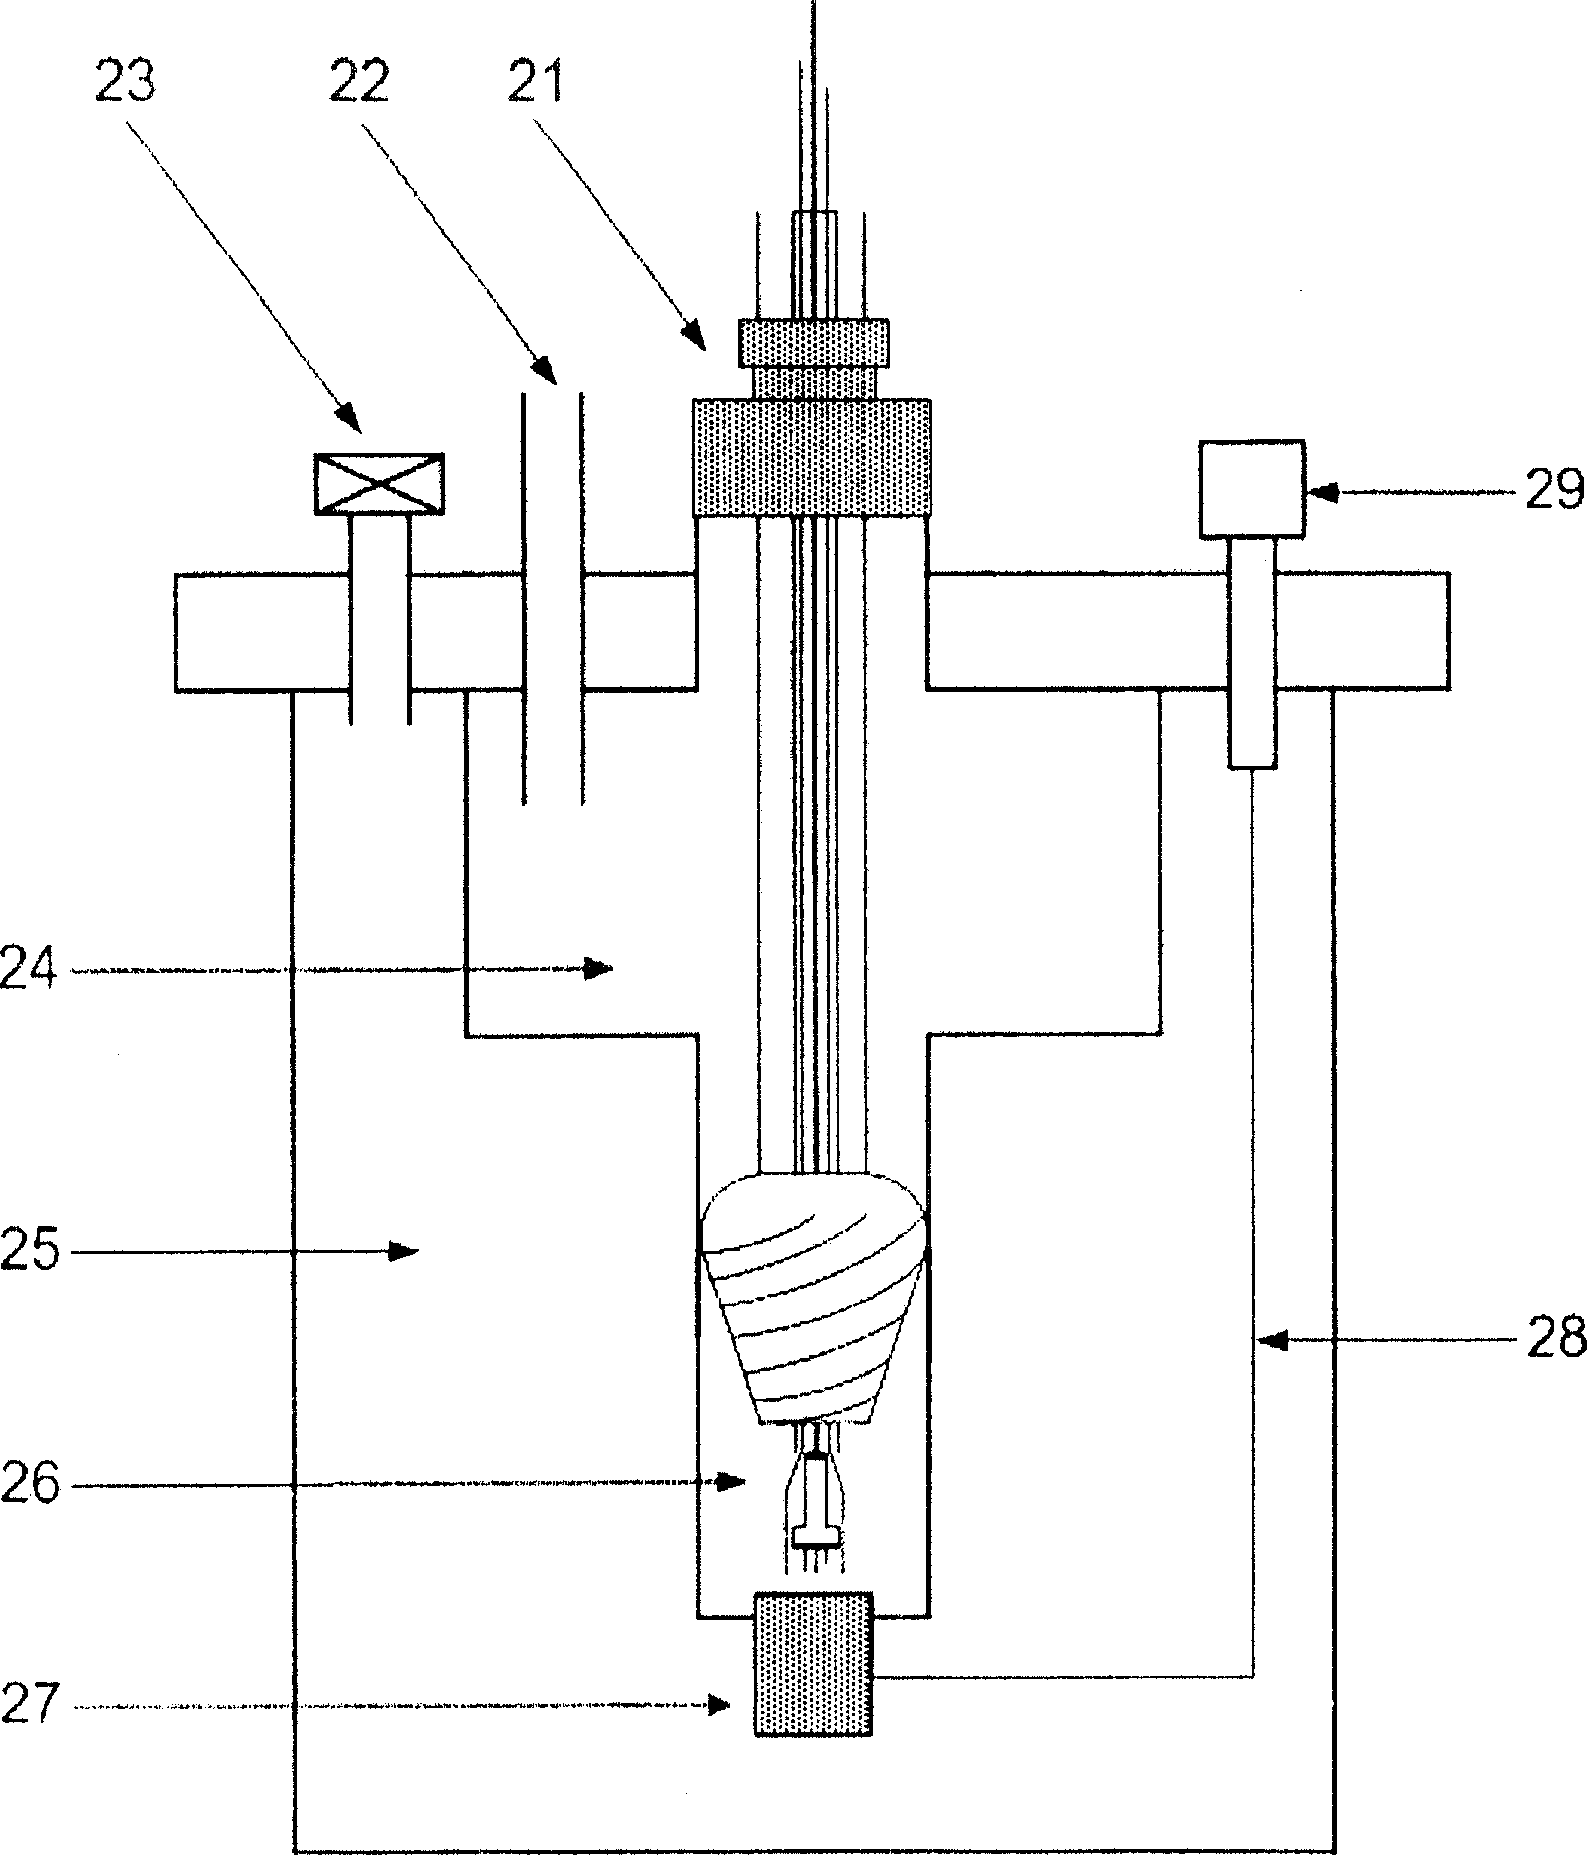 Structure of single photon detecting element